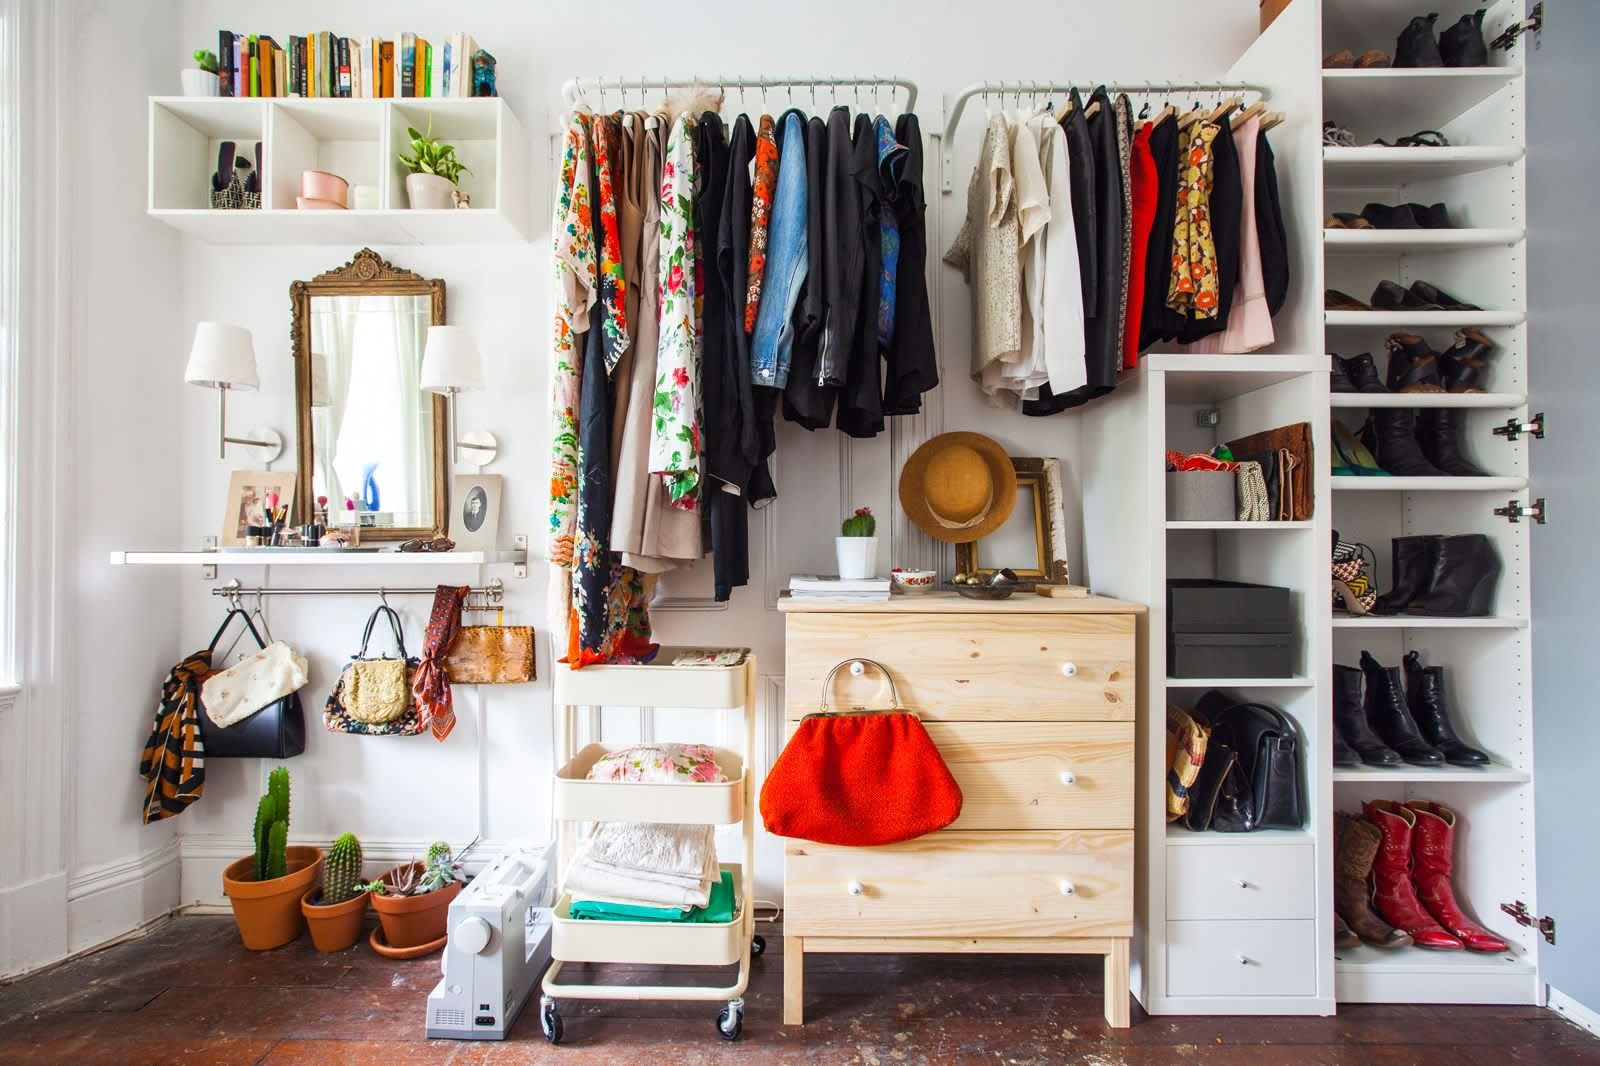 Dealing With Closet Organizing In Studio Apartments - ClosetWorld